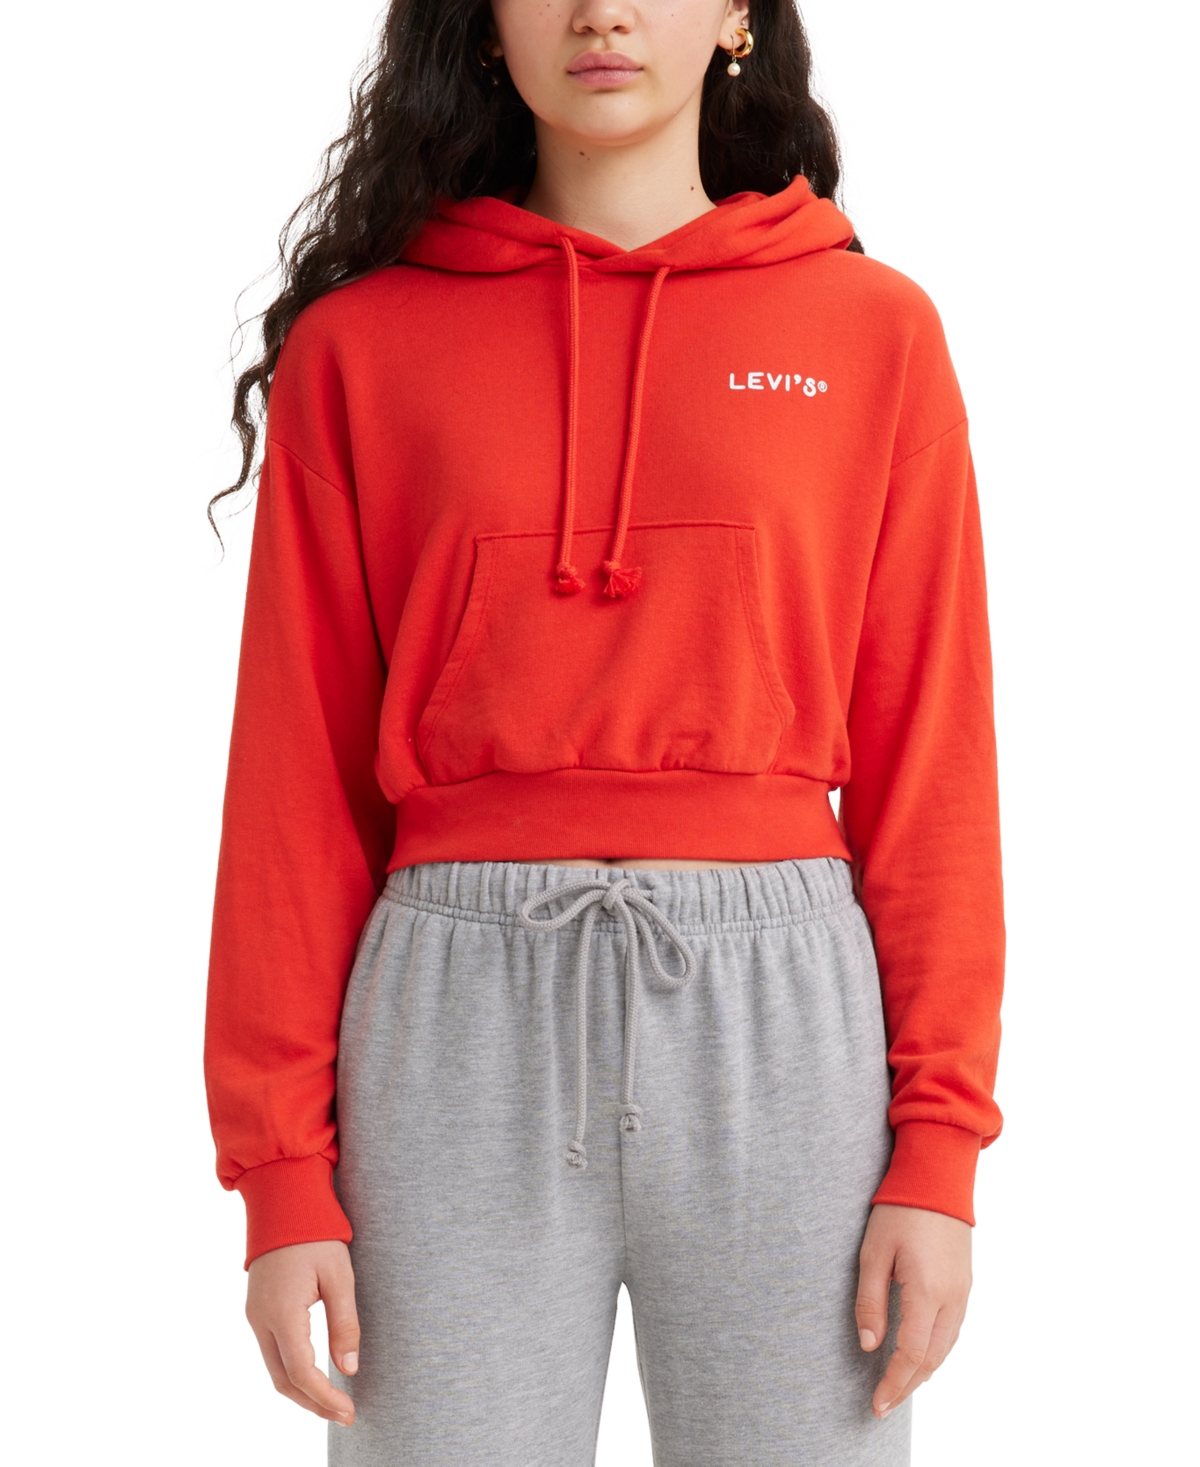  Levi's Women's Graphic Cropped Laundry Day Hoodie, Created for Macy's